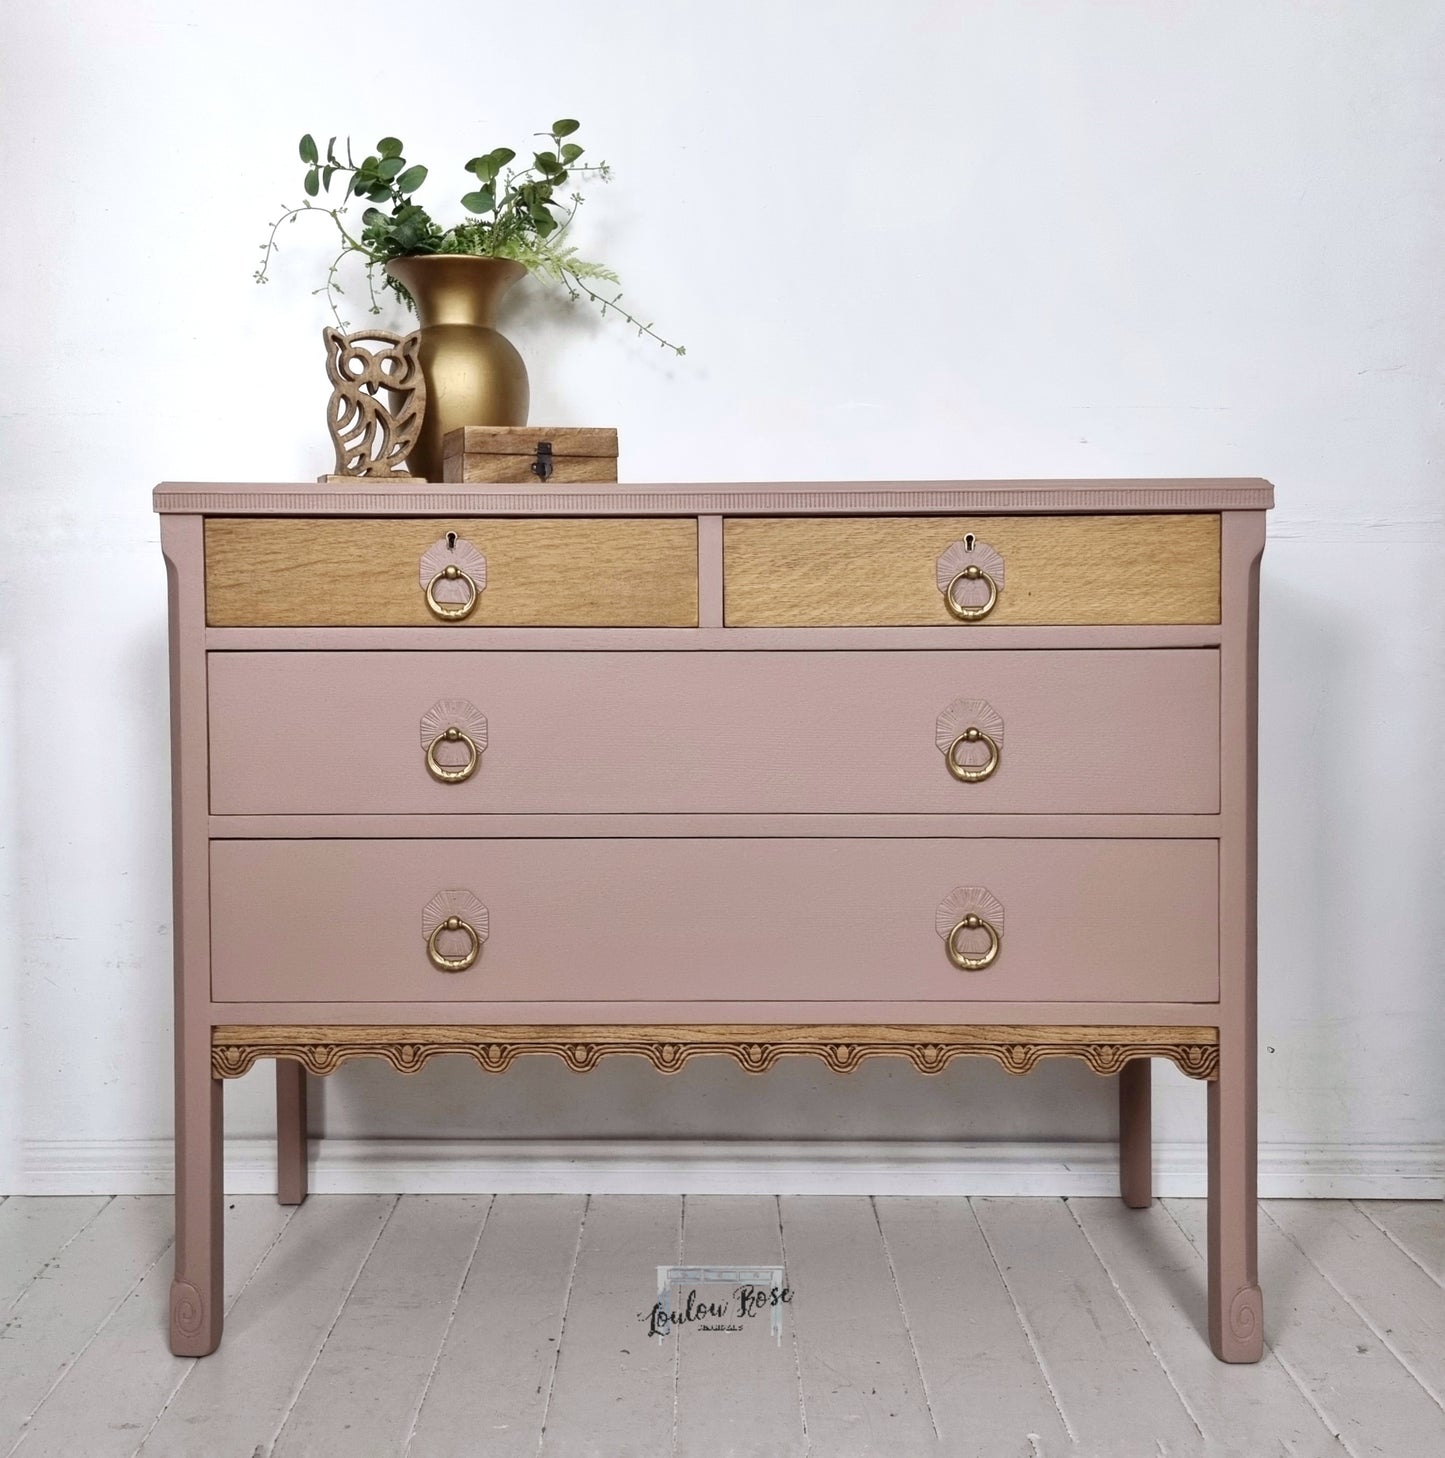 Vintage Oak Chest of Drawers Painted in Dusky Pink with Bare Wood Drawers and Carved Detail